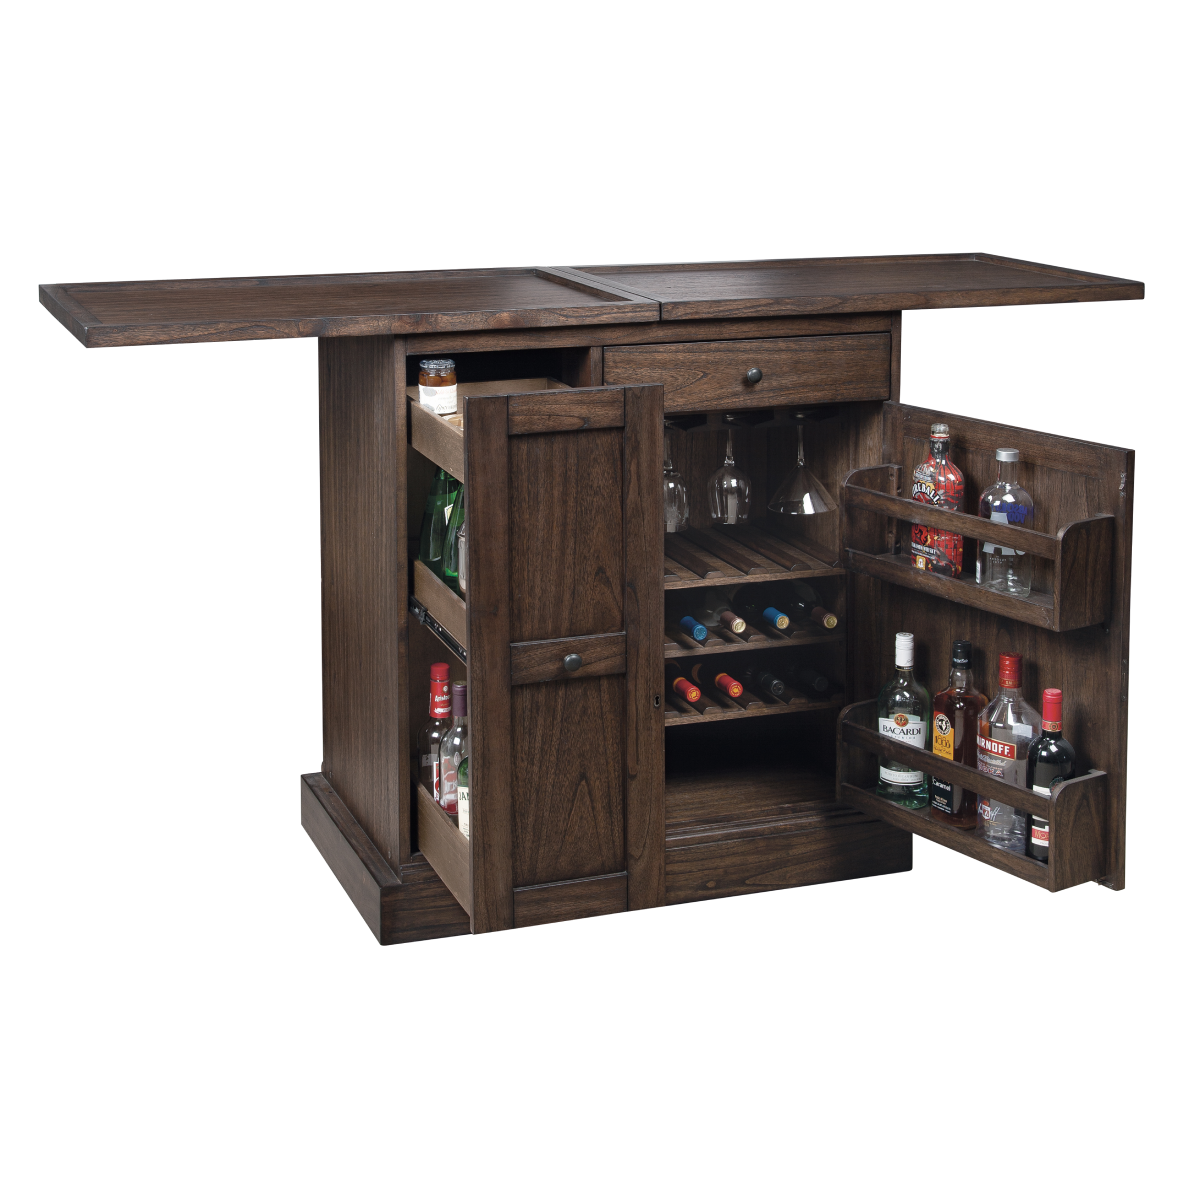 Howard Miller Tipple Wine & Bar Console 695280 view with open counter top and shelves showing inside interior - Home Bars USA